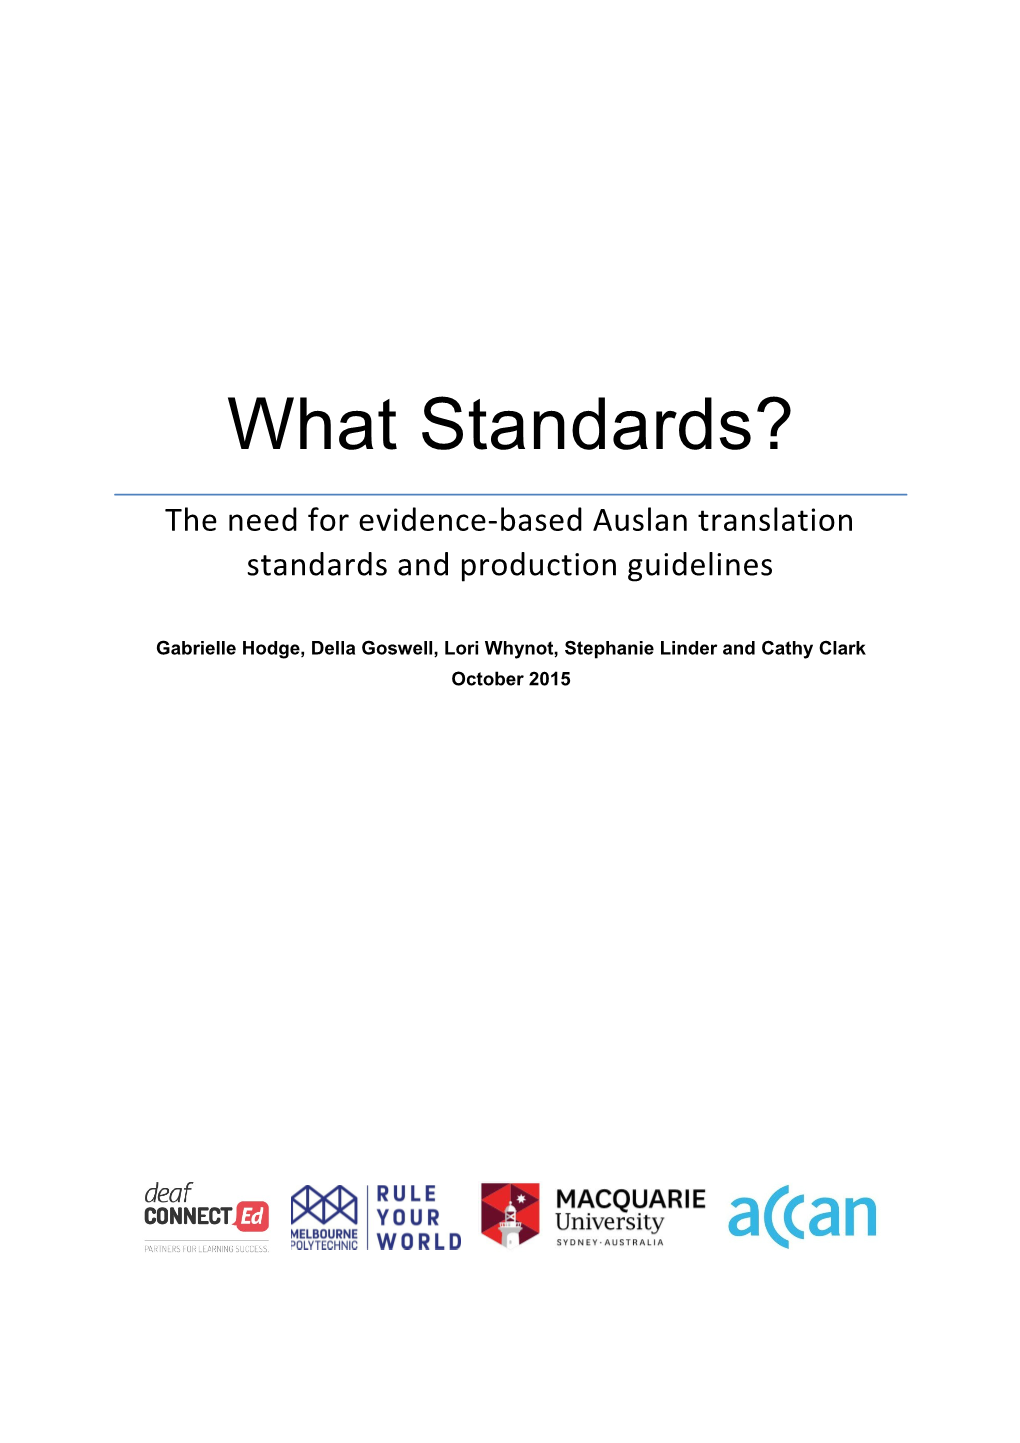 What Standards? the Need for Evidence-Based Auslan Translation Standards and Production